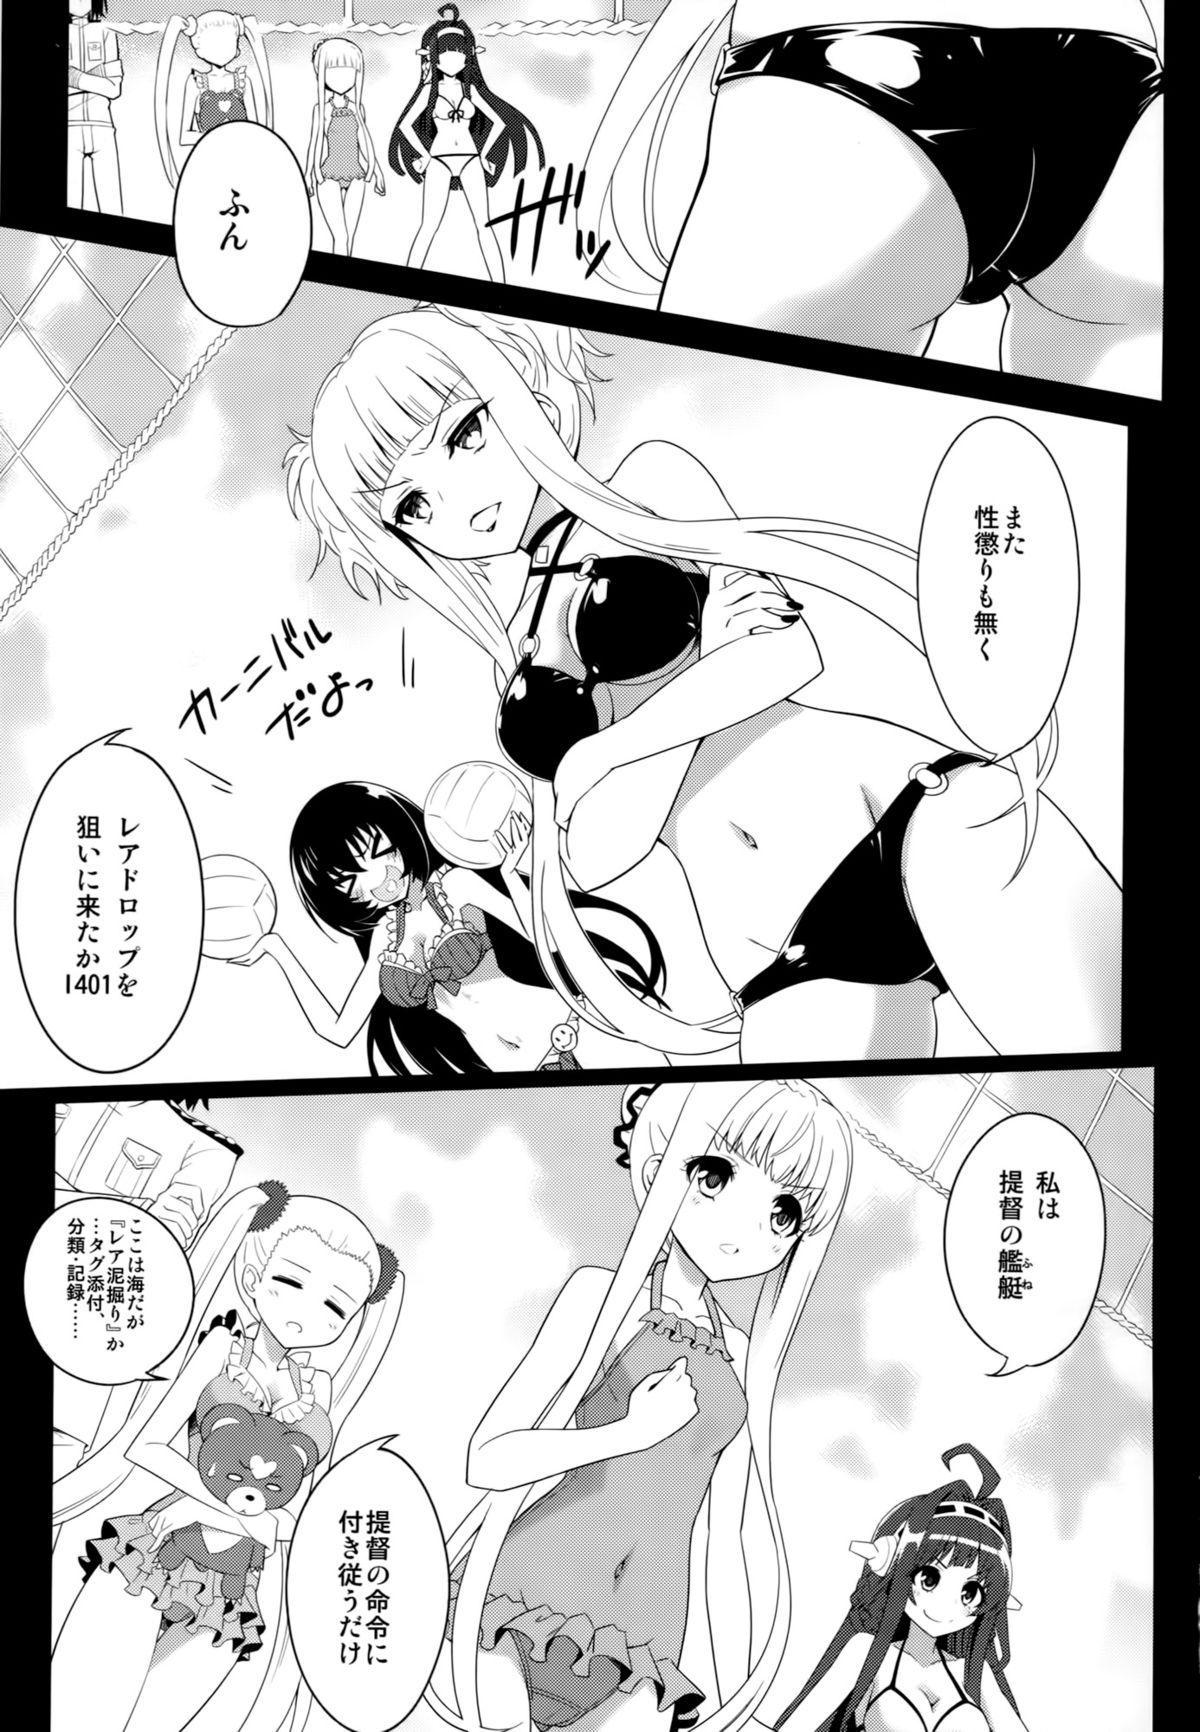 Oldvsyoung Be United, Please!! Extra Operation ☆ - Kantai collection Arpeggio of blue steel Mofos - Page 3